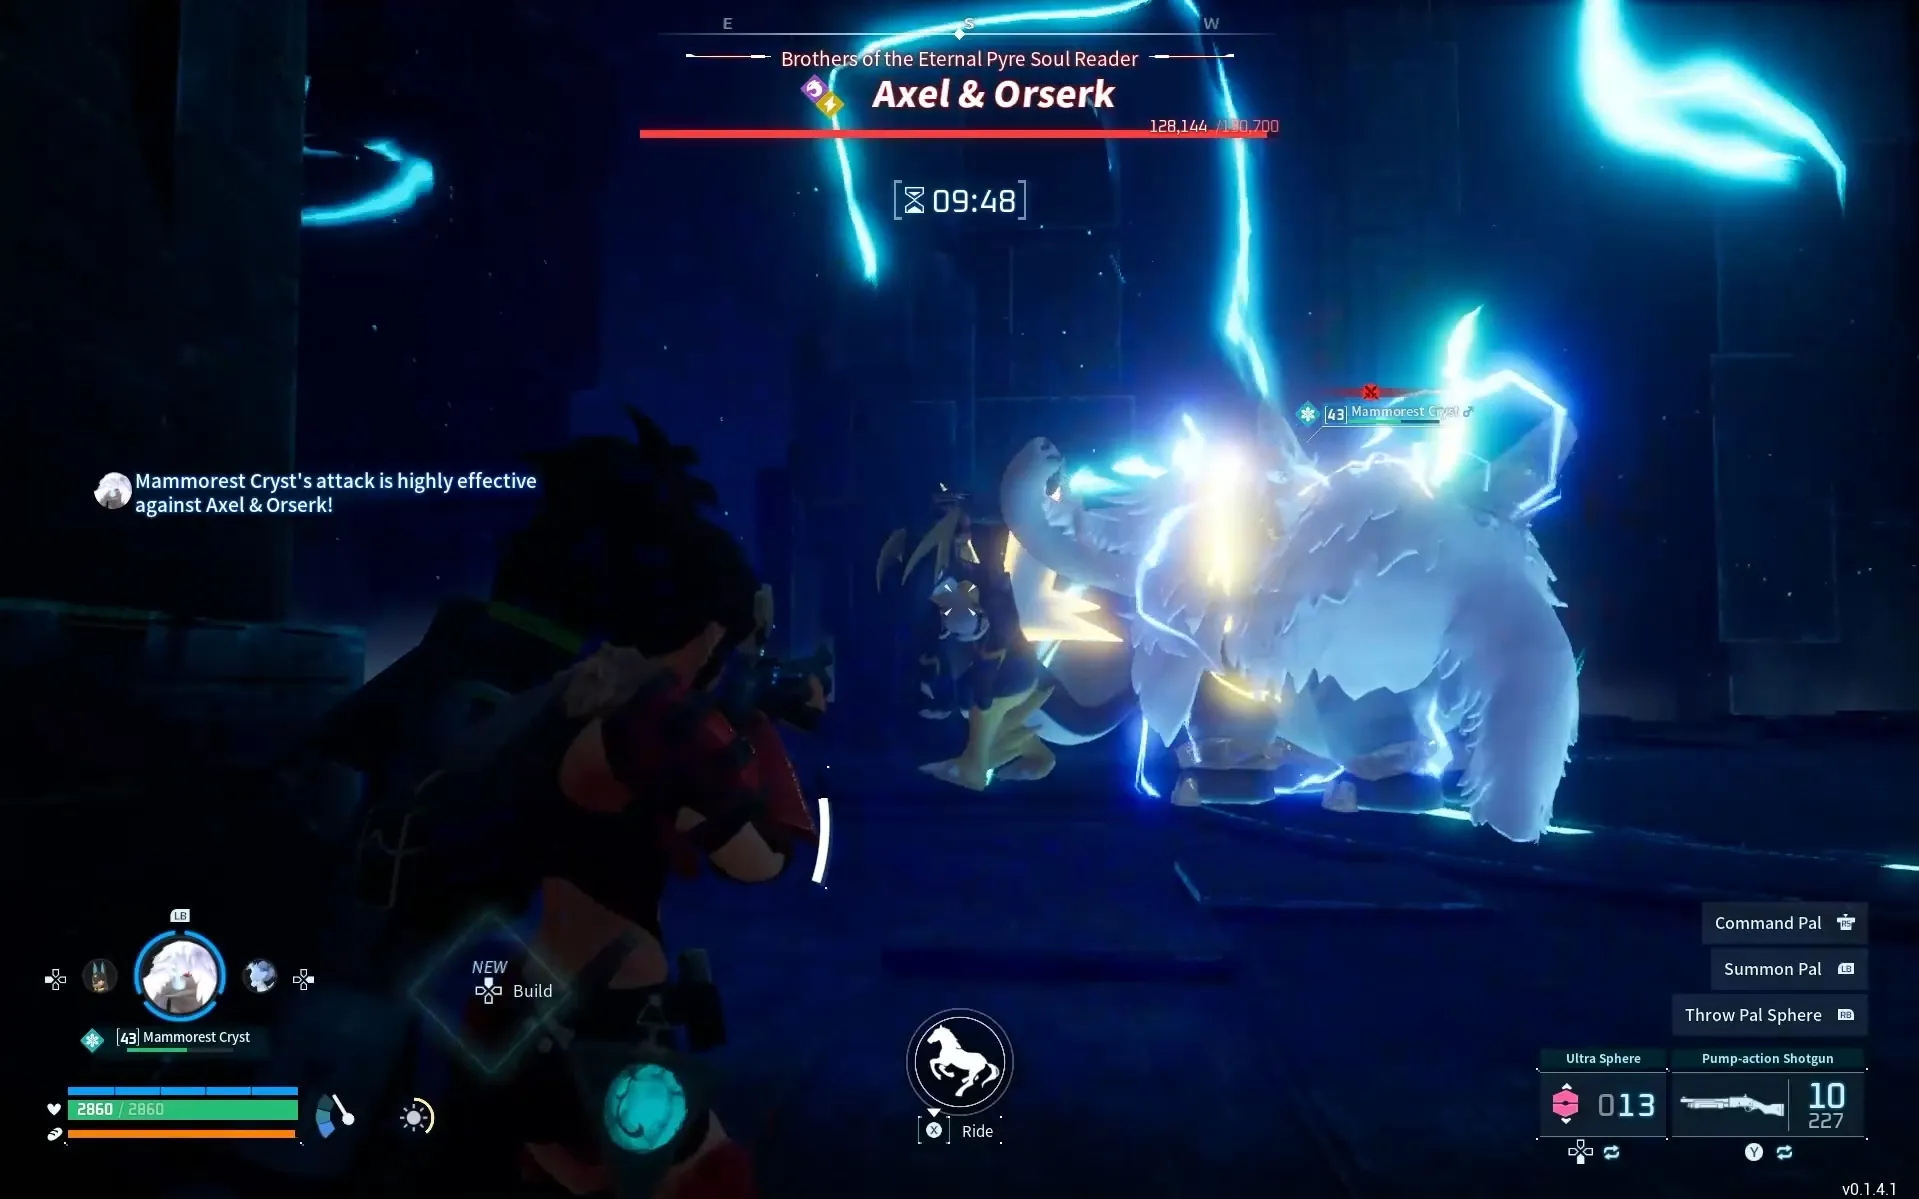 Player shooting Axel and Orserk with Shotgun in Palworld